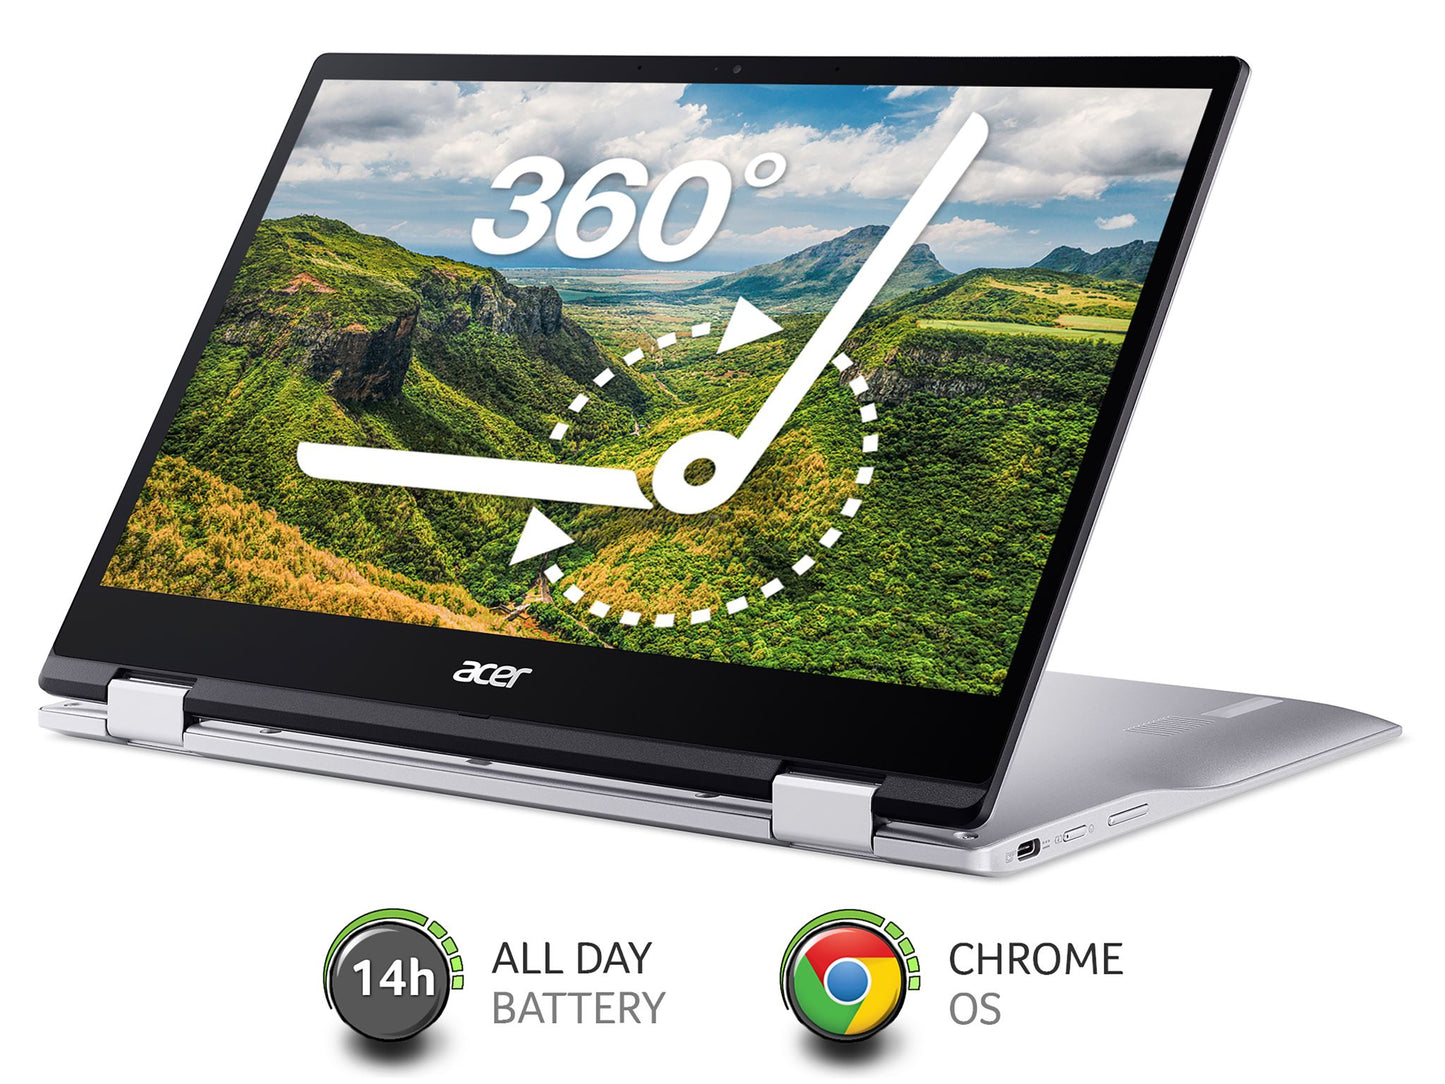 Acer Chromebook Spin 513 CP513-1H - (Qualcomm SC7180, 4GB RAM, 64GB eMMC, 13.3 inch Full HD Touchscreen Display, Chrome OS, Silver)